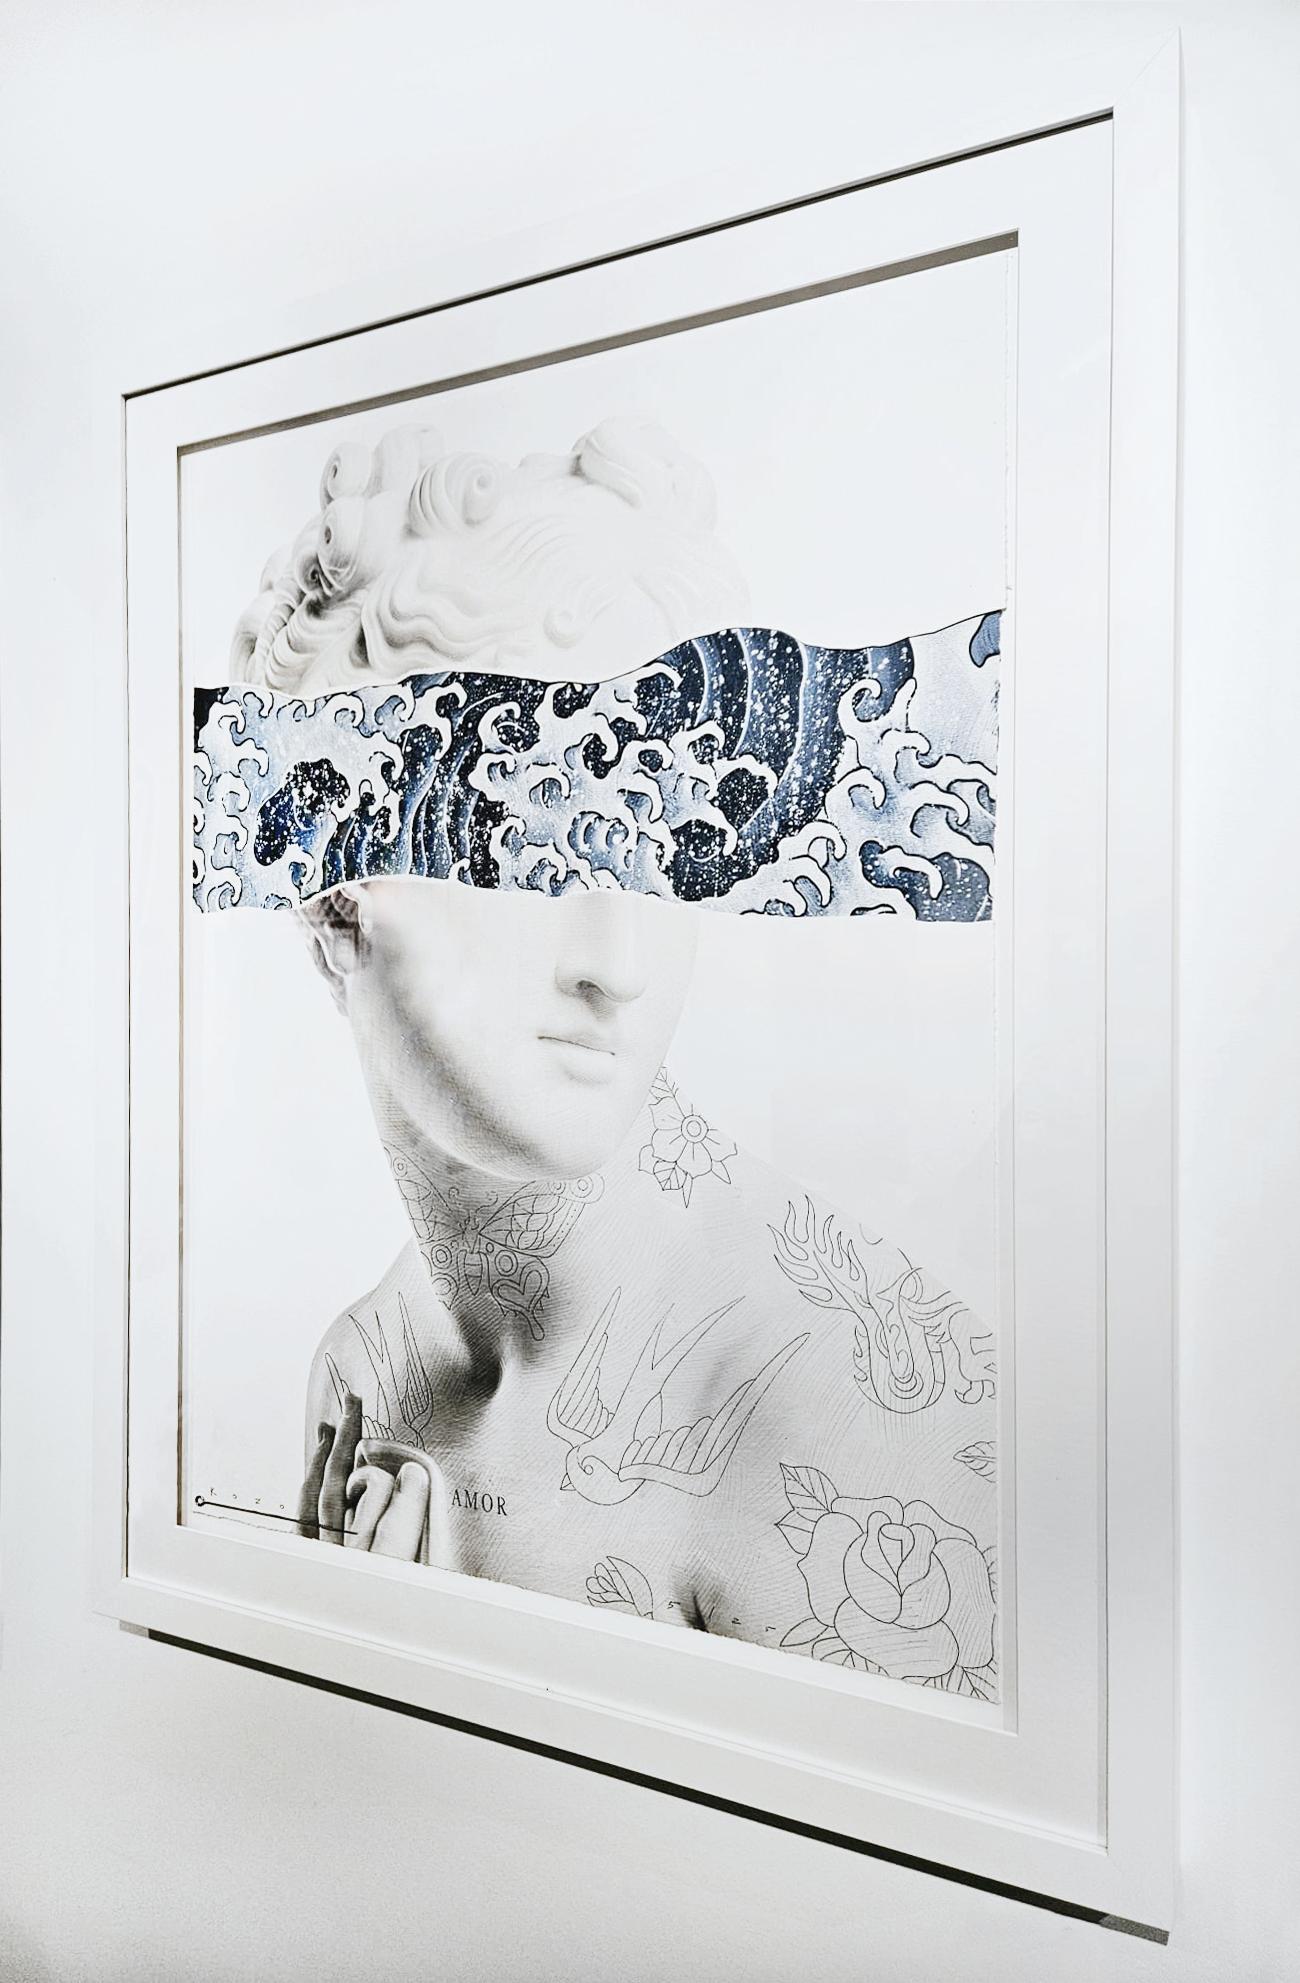 Artist:  , Kozo
Title:  Beauty of Chaos 
Medium:  Lithograph and Tattoo ink on paper
Unframed Dimensions:  30